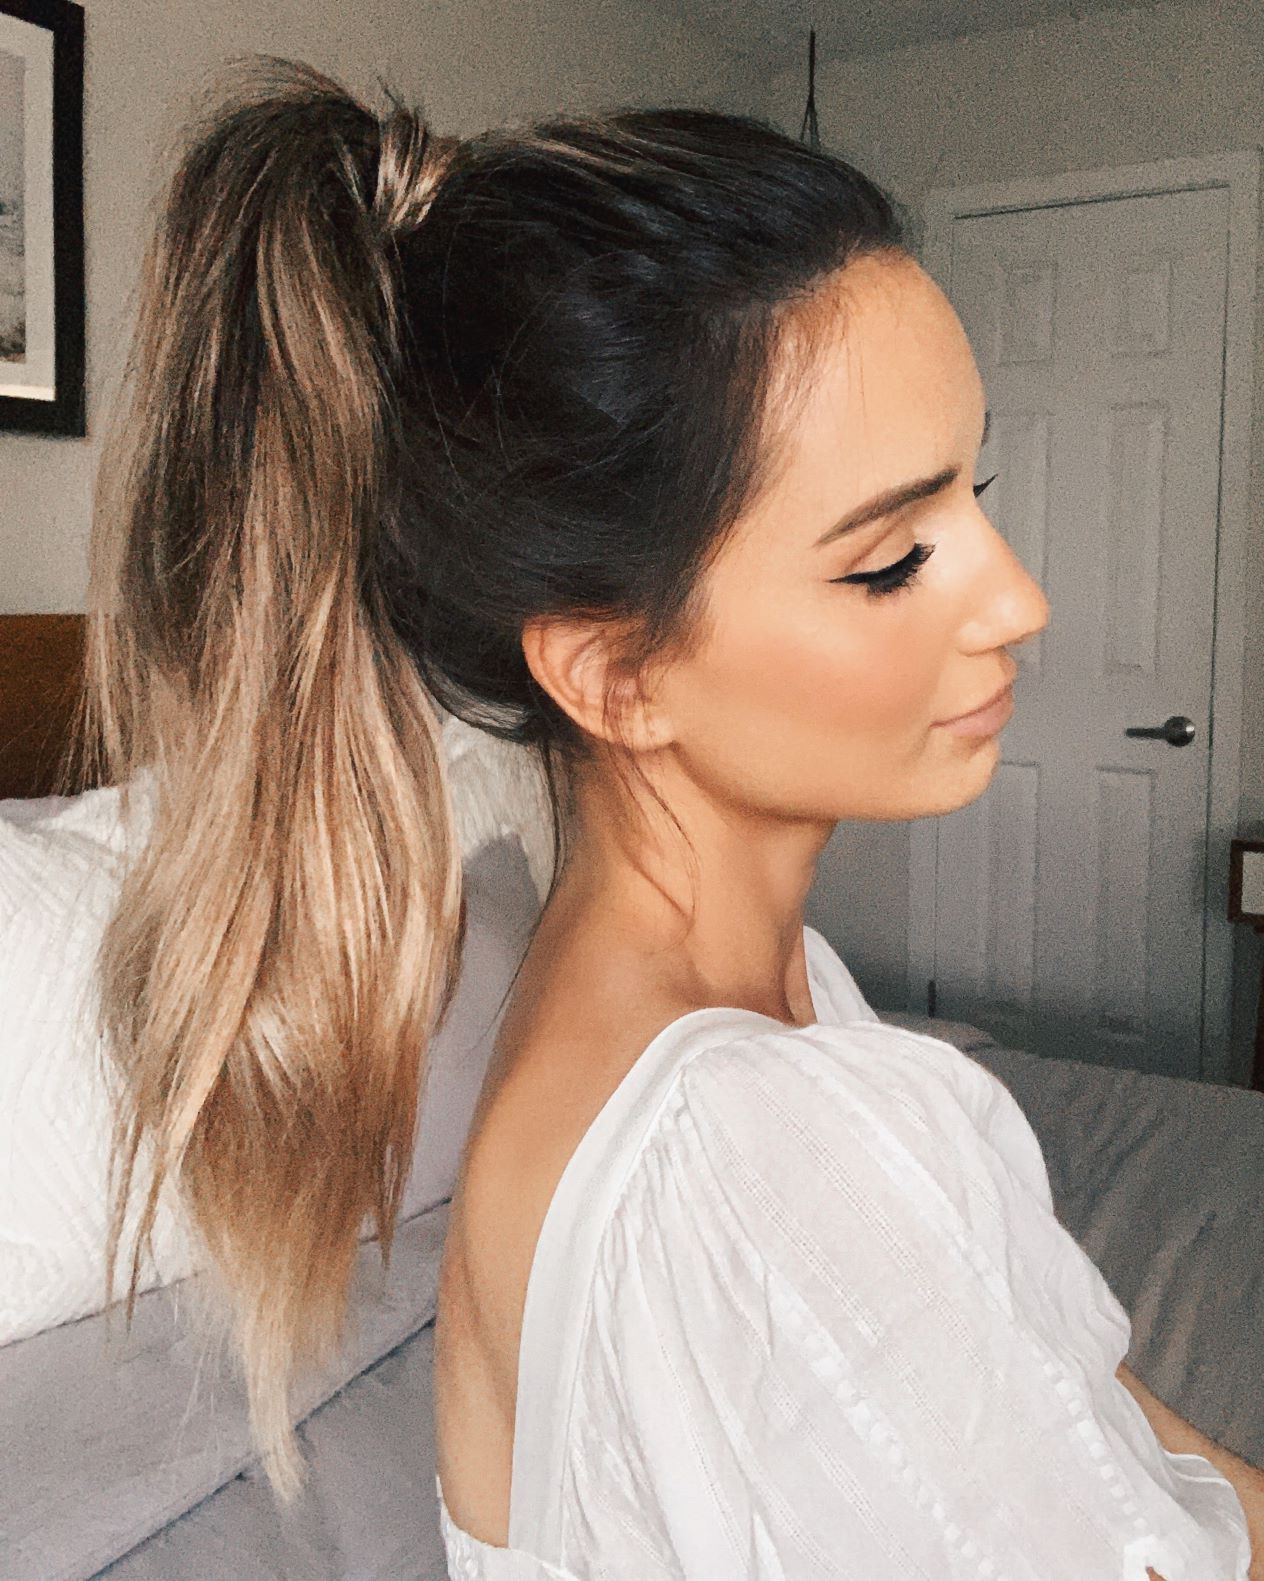 How To Dress Up A Ponytail: 5 Stylish Tricks That Are Ridiculously Throughout 2018 Chic Ponytail Hairstyles Ponytail Hairstyles (View 18 of 20)